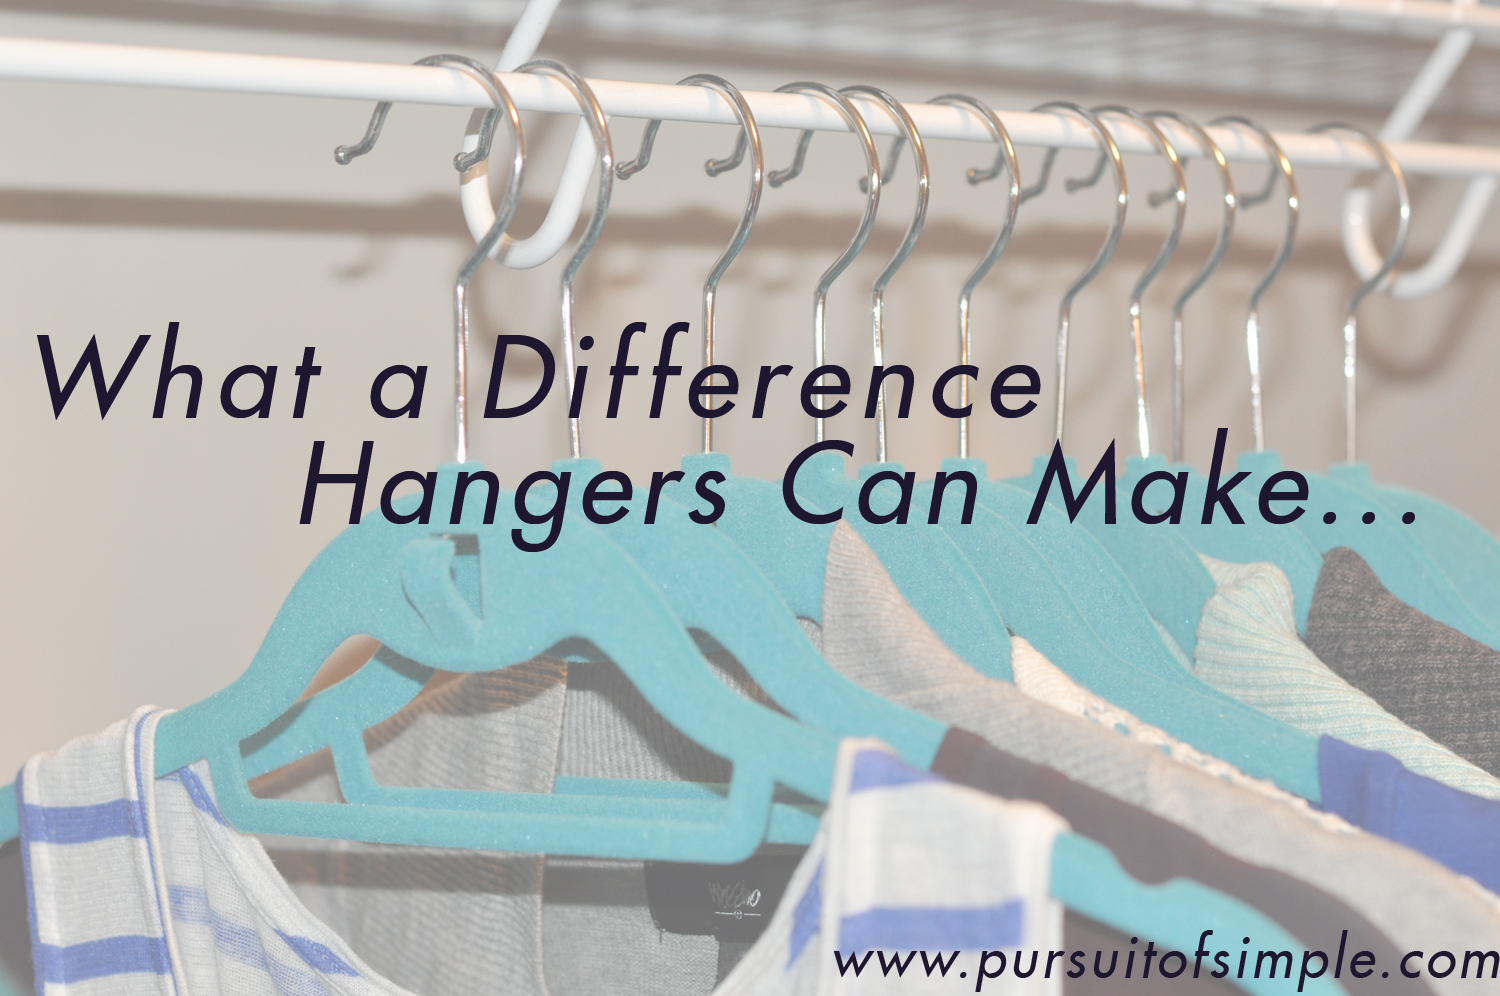 https://pursuitofsimple.com/wp-content/uploads/2014/02/What-a-Difference-Hangers-Can-Make.jpg